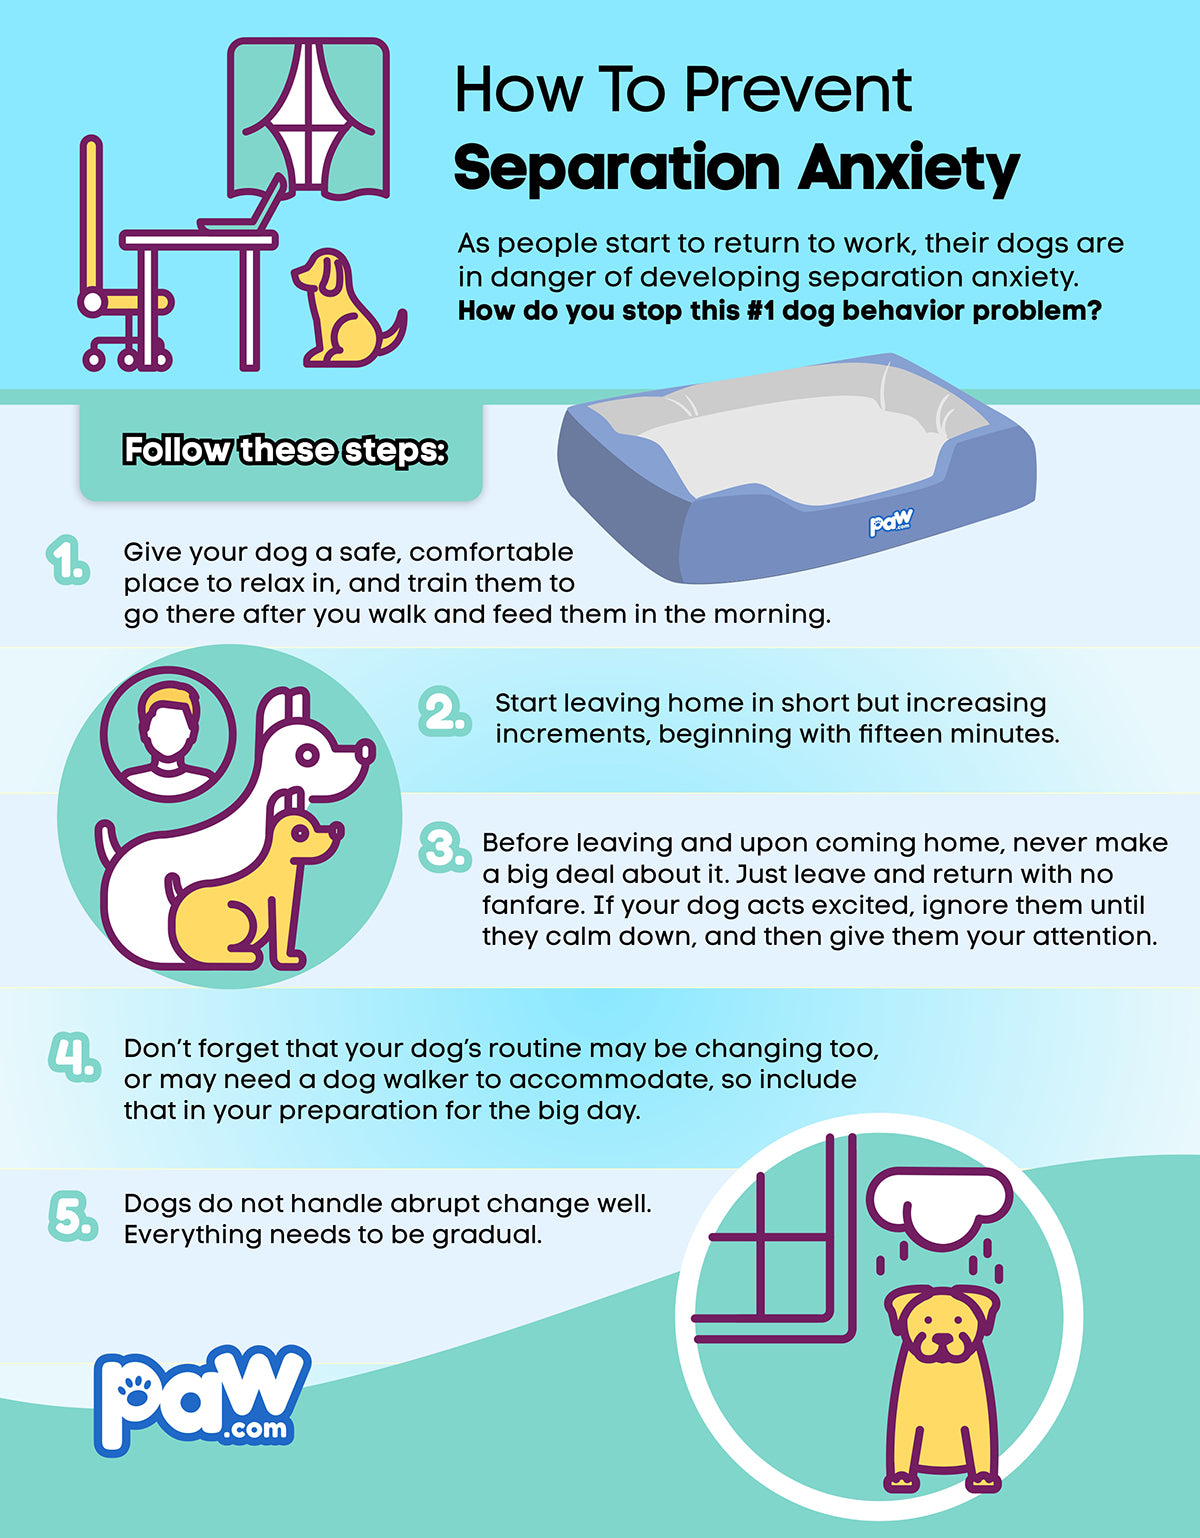 How to prevent separation anxiety infographic